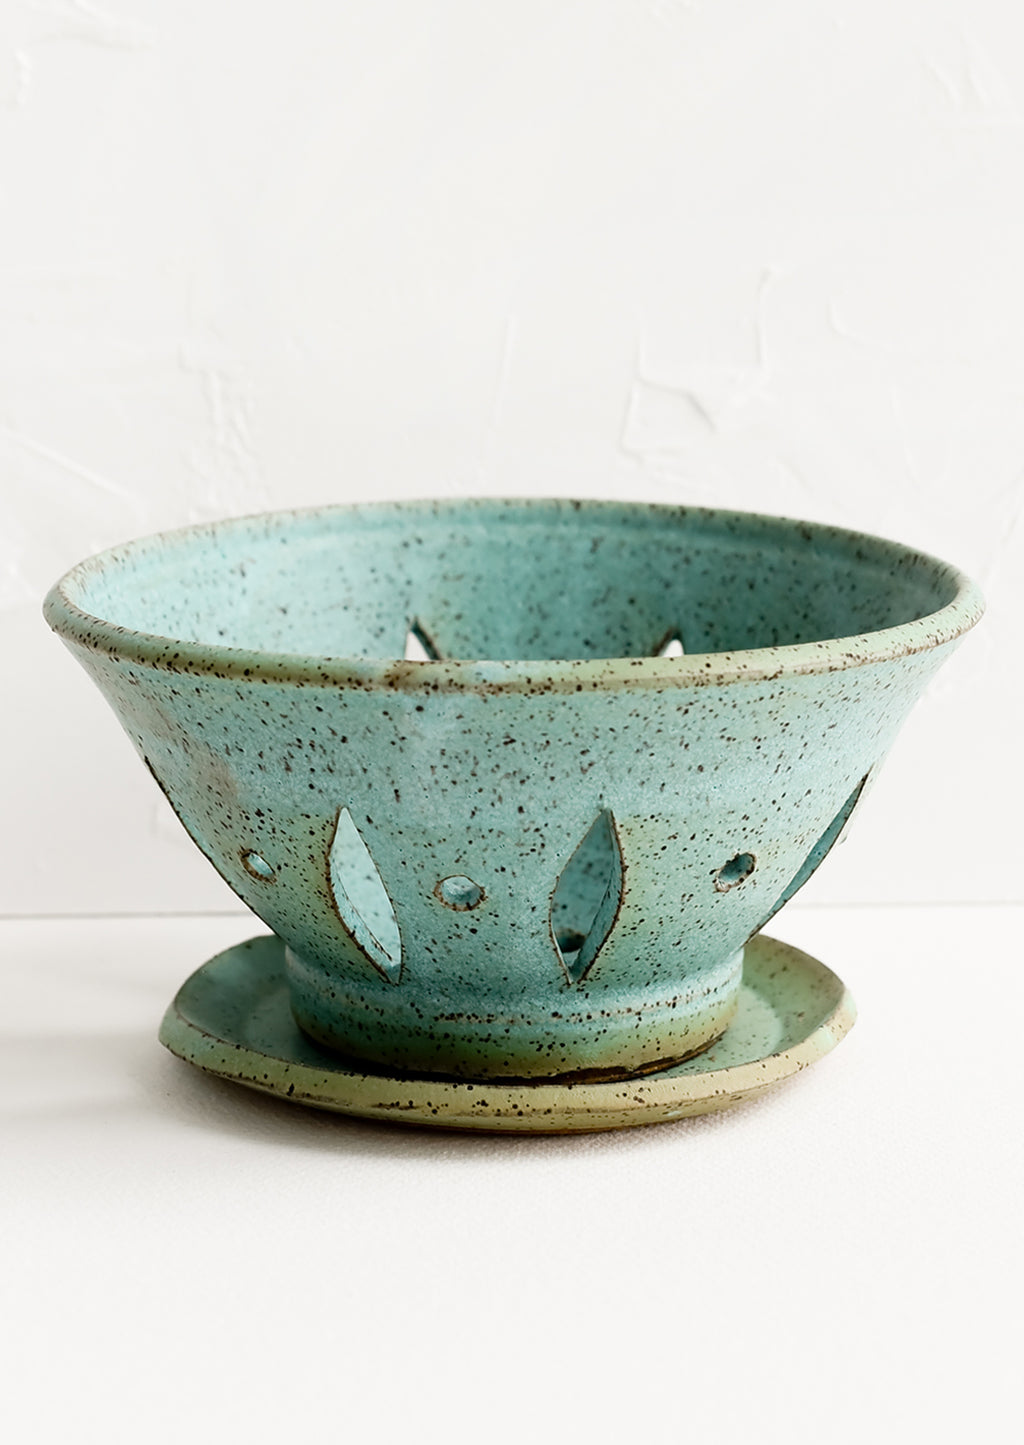 Turquoise Speckle: A ceramic berry bowl with plate in turquoise.